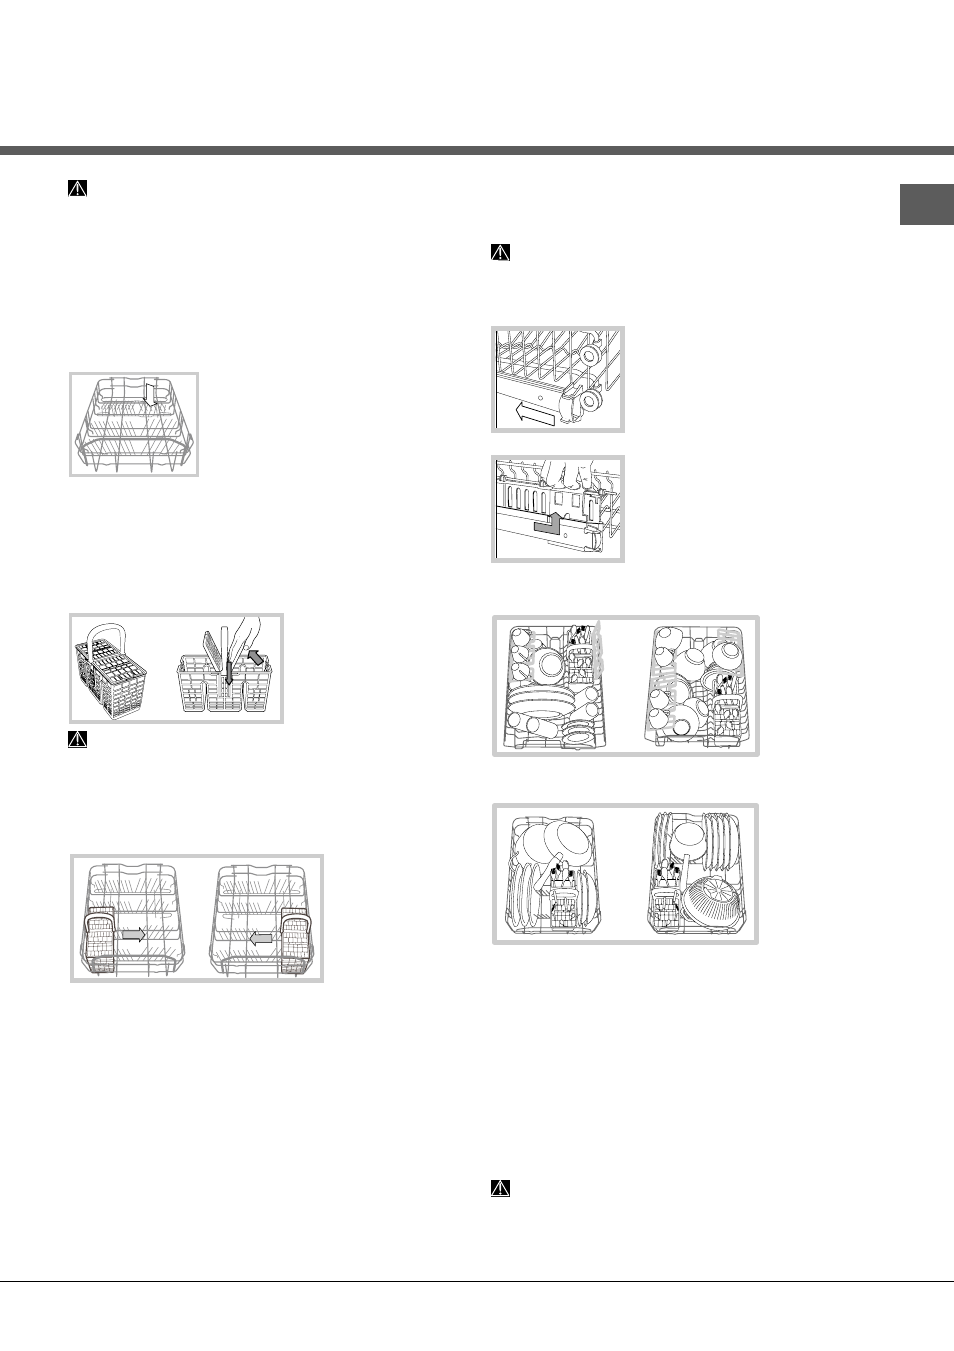 Loading the racks, Lower rack, Cutlery basket | Hotpoint Ariston LST 216 A-HA  User Manual | Page 17 / 84 | Original mode